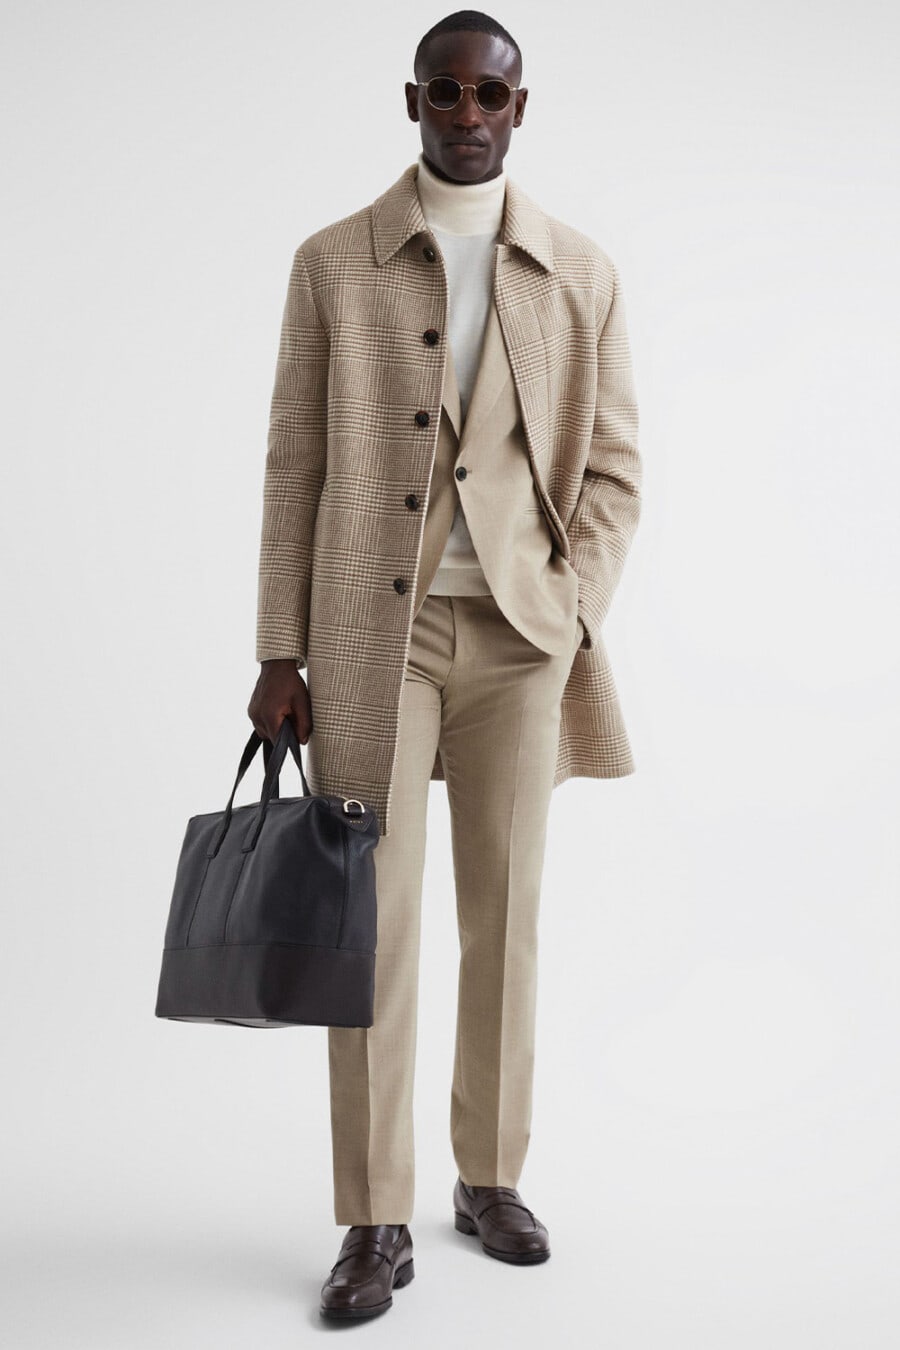 Men's cream/beige suit, off-white turtleneck, beige check overcoat, brown leather penny loafers and brown leather weekender bag outfit